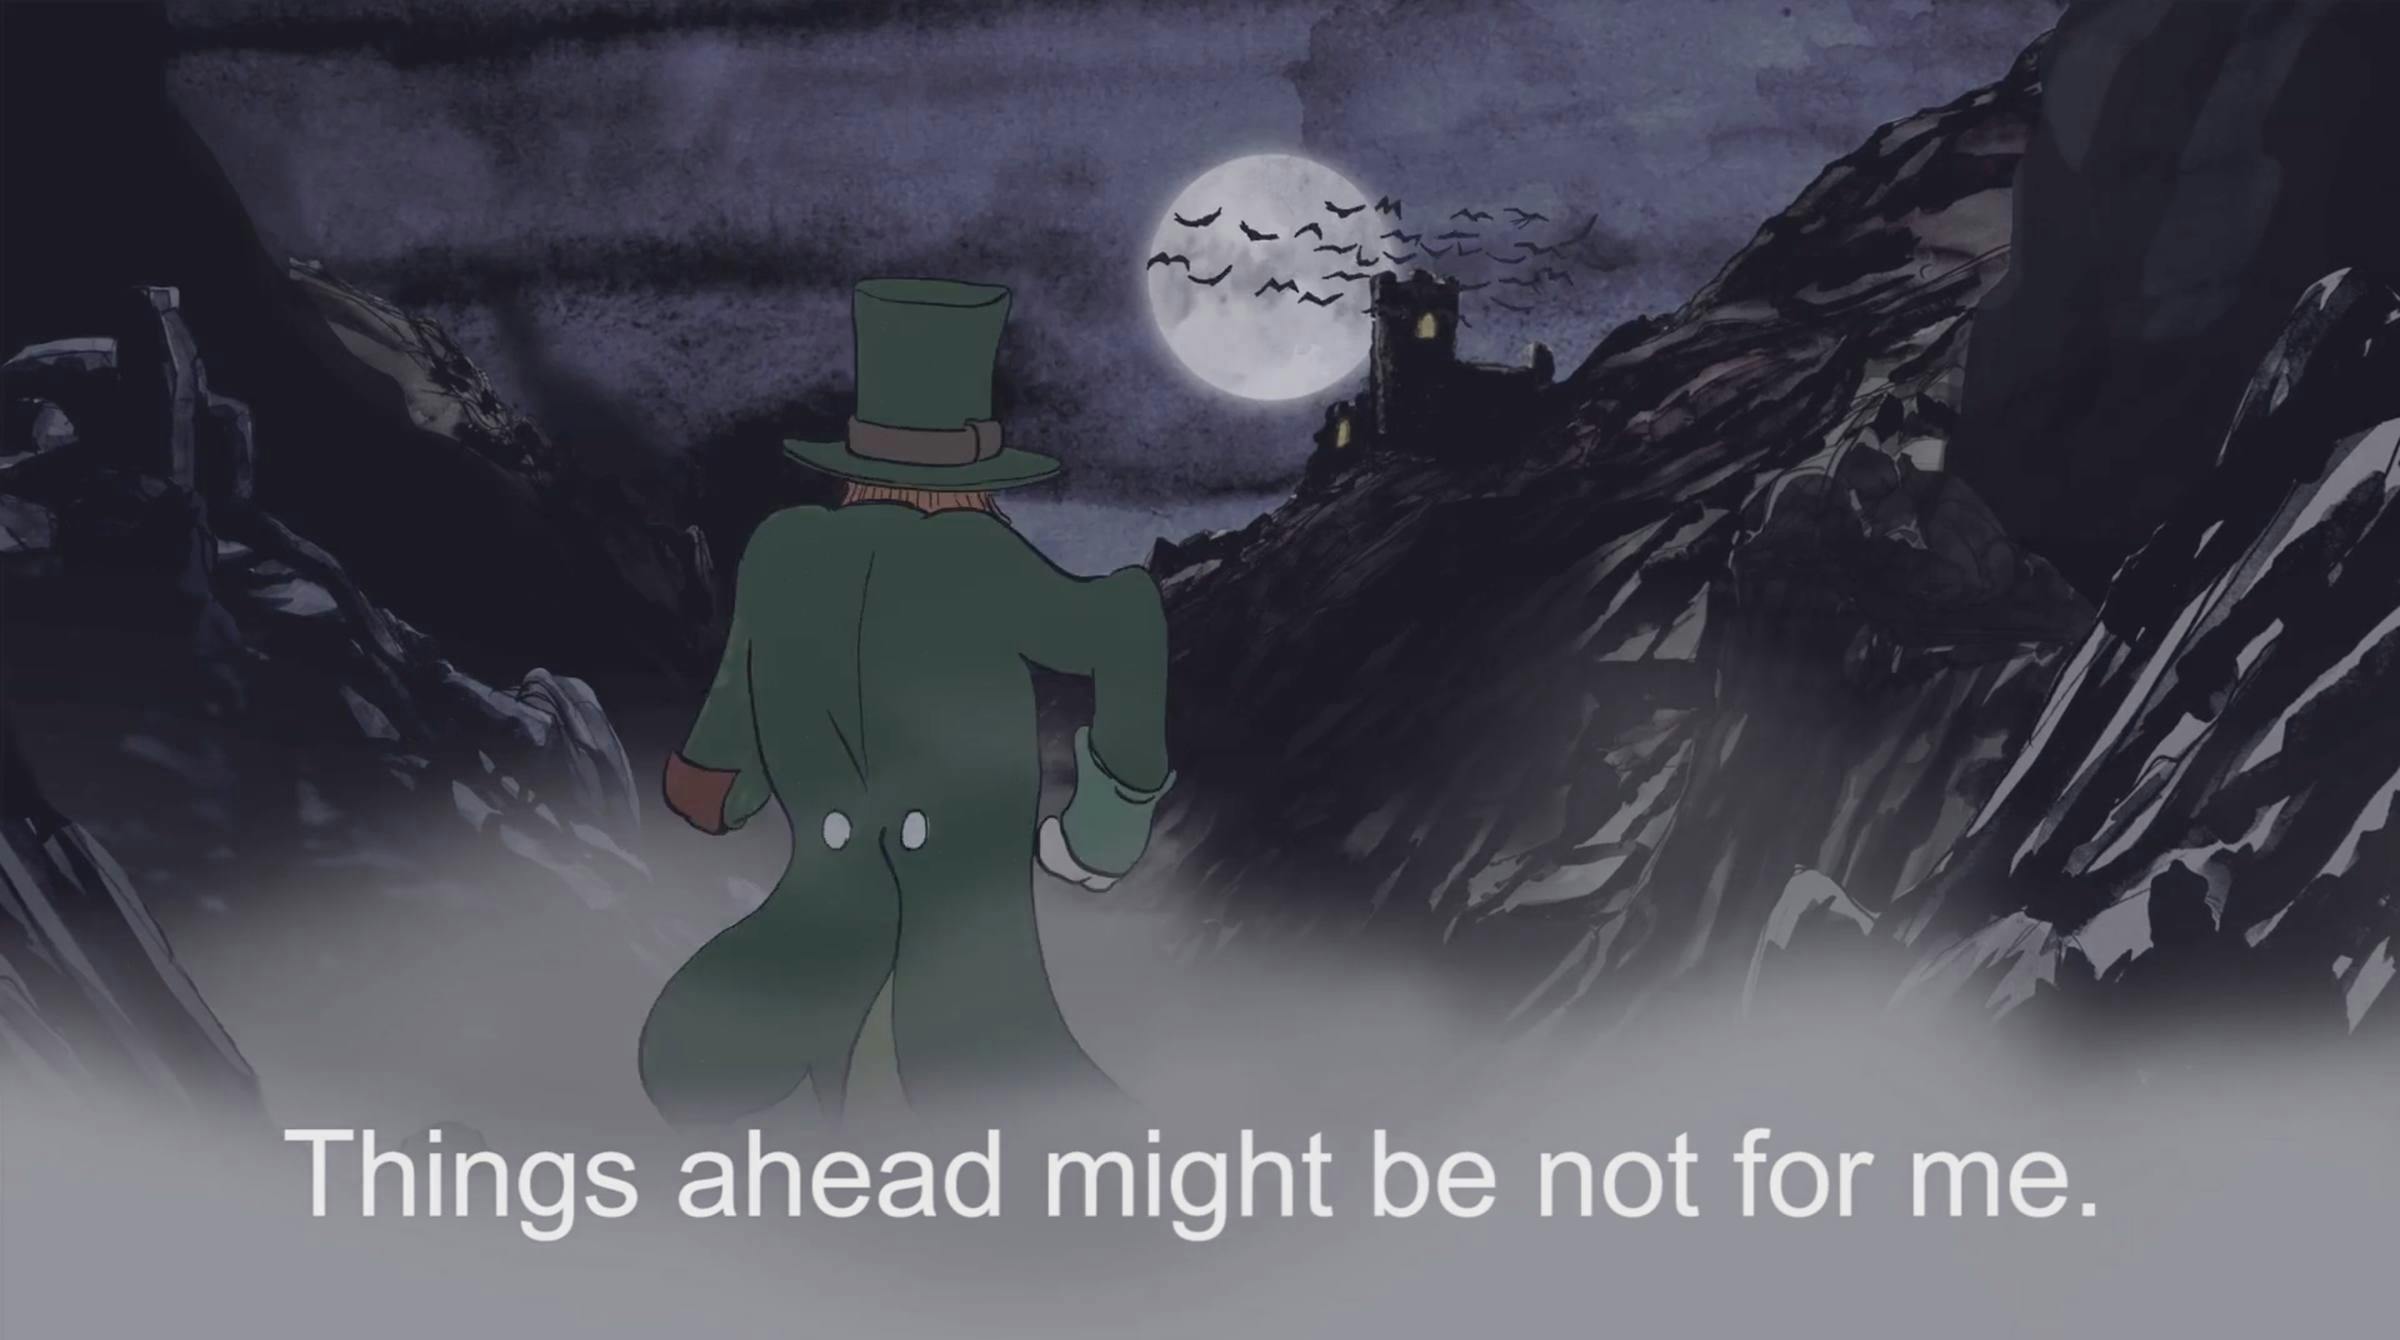 A comic-style image of a person wearing a green coat and top hat looking into the distance through a valley to a darkened building. The words 'Things ahead might be not for me.' are superimposed on top.